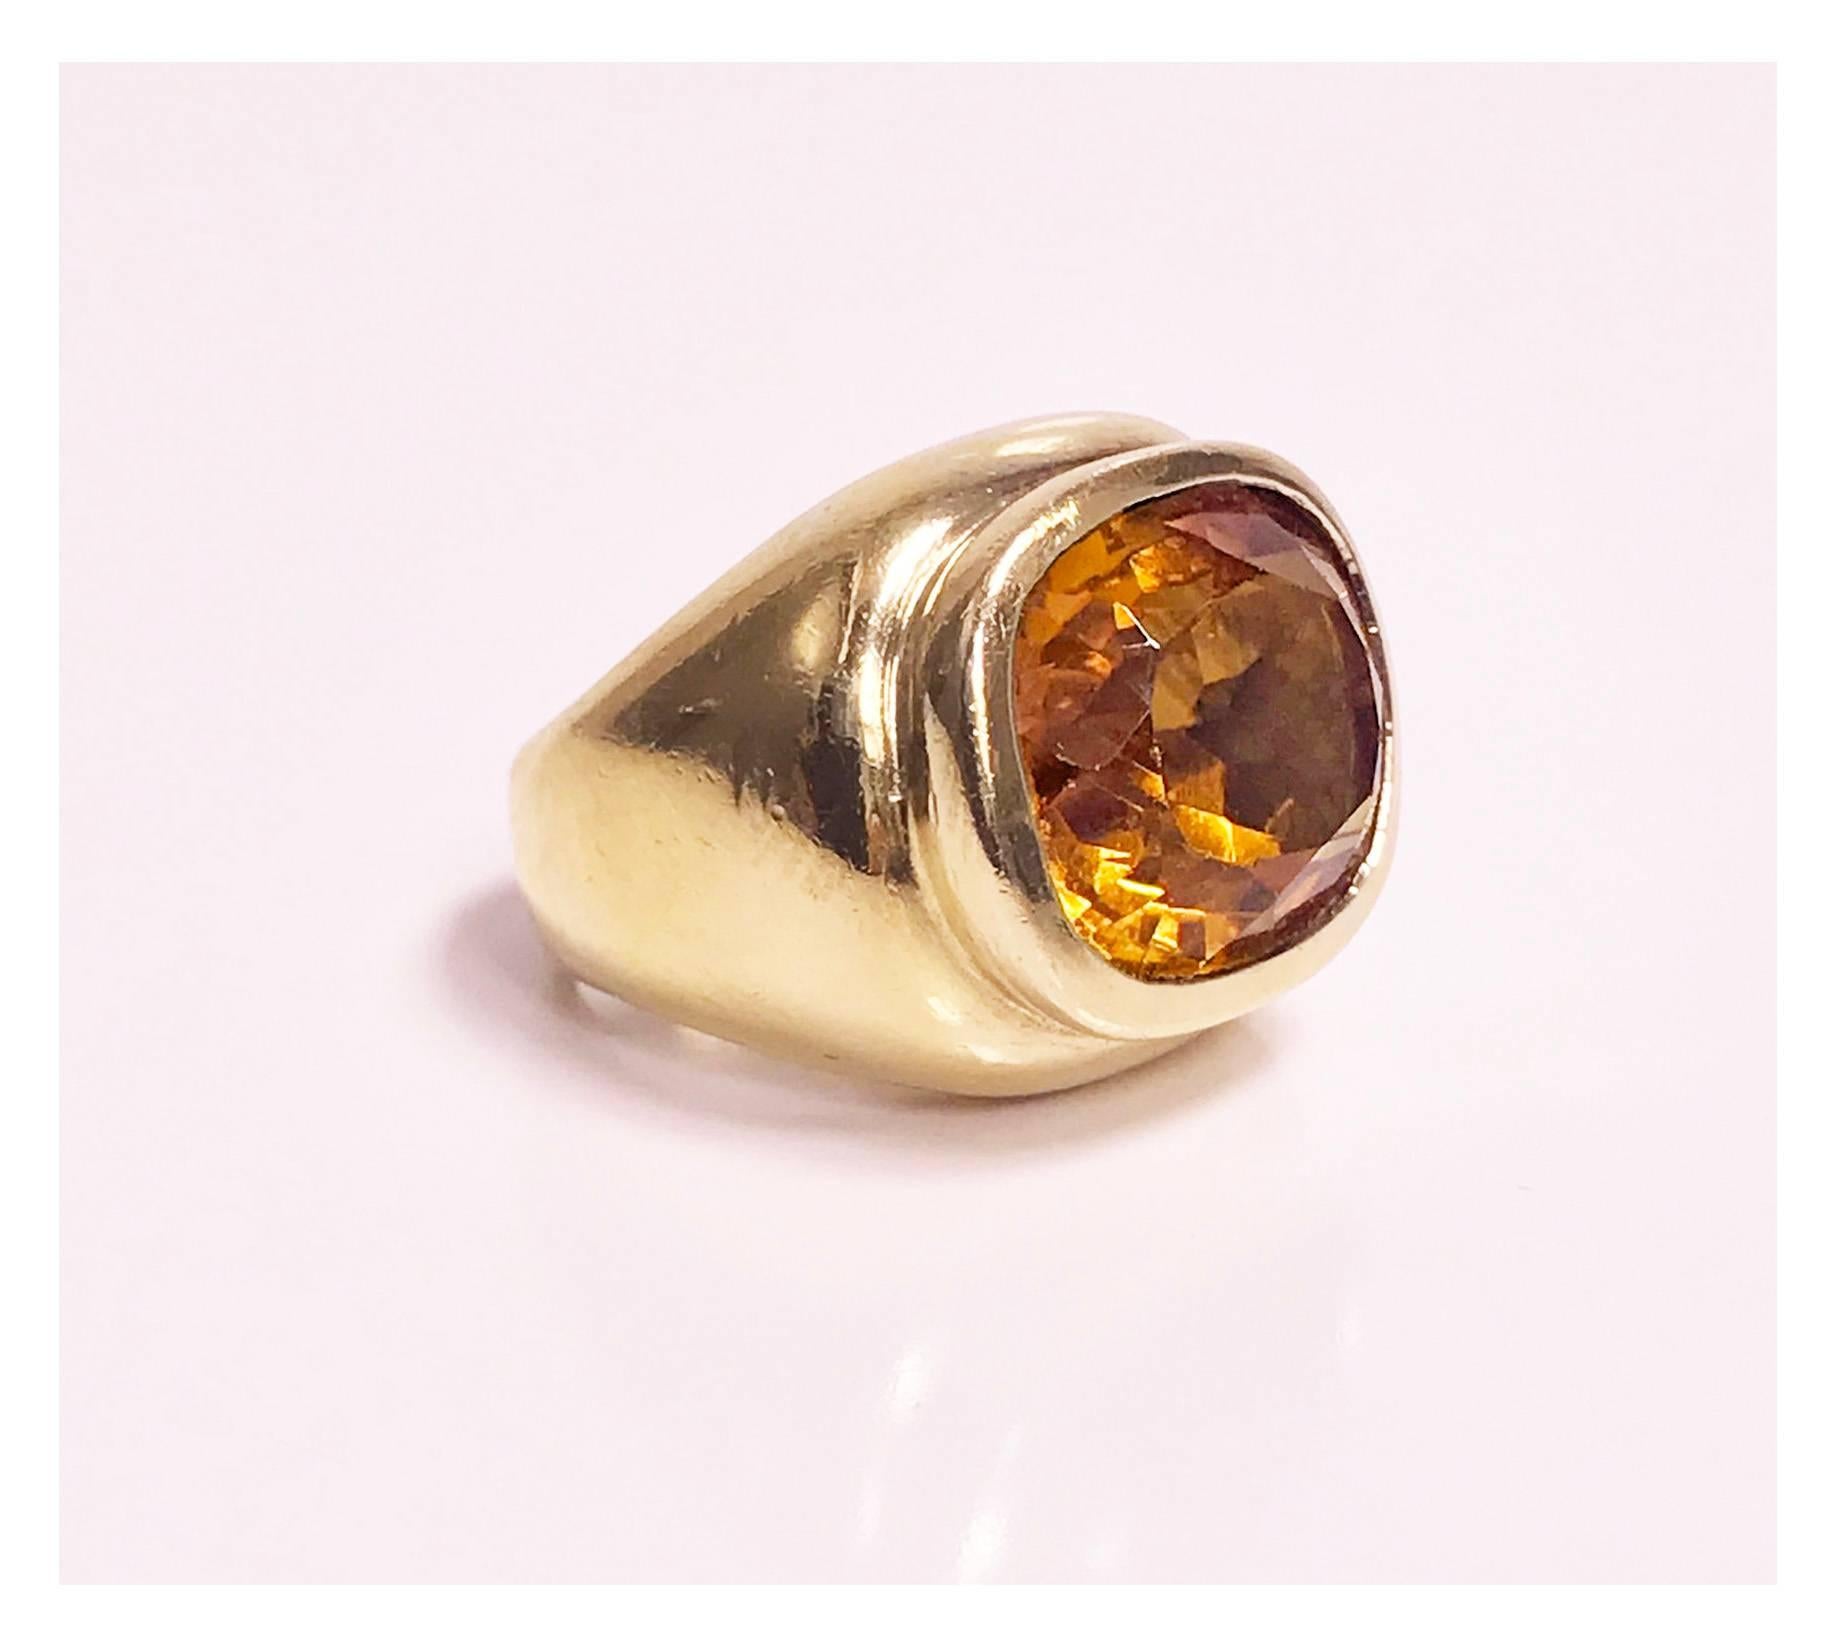 French custom Citrine 18K on silver Ring, C.1970 maker's mark Ste C and IC in lozenge with Minerva mark for mixed metals. Fine Reddish orange cushion cut bezel Citrine gauging 17.5 x 15.5 x 10 mm, approximately 16.00 cts,  Ring size: 7. Item Weight: